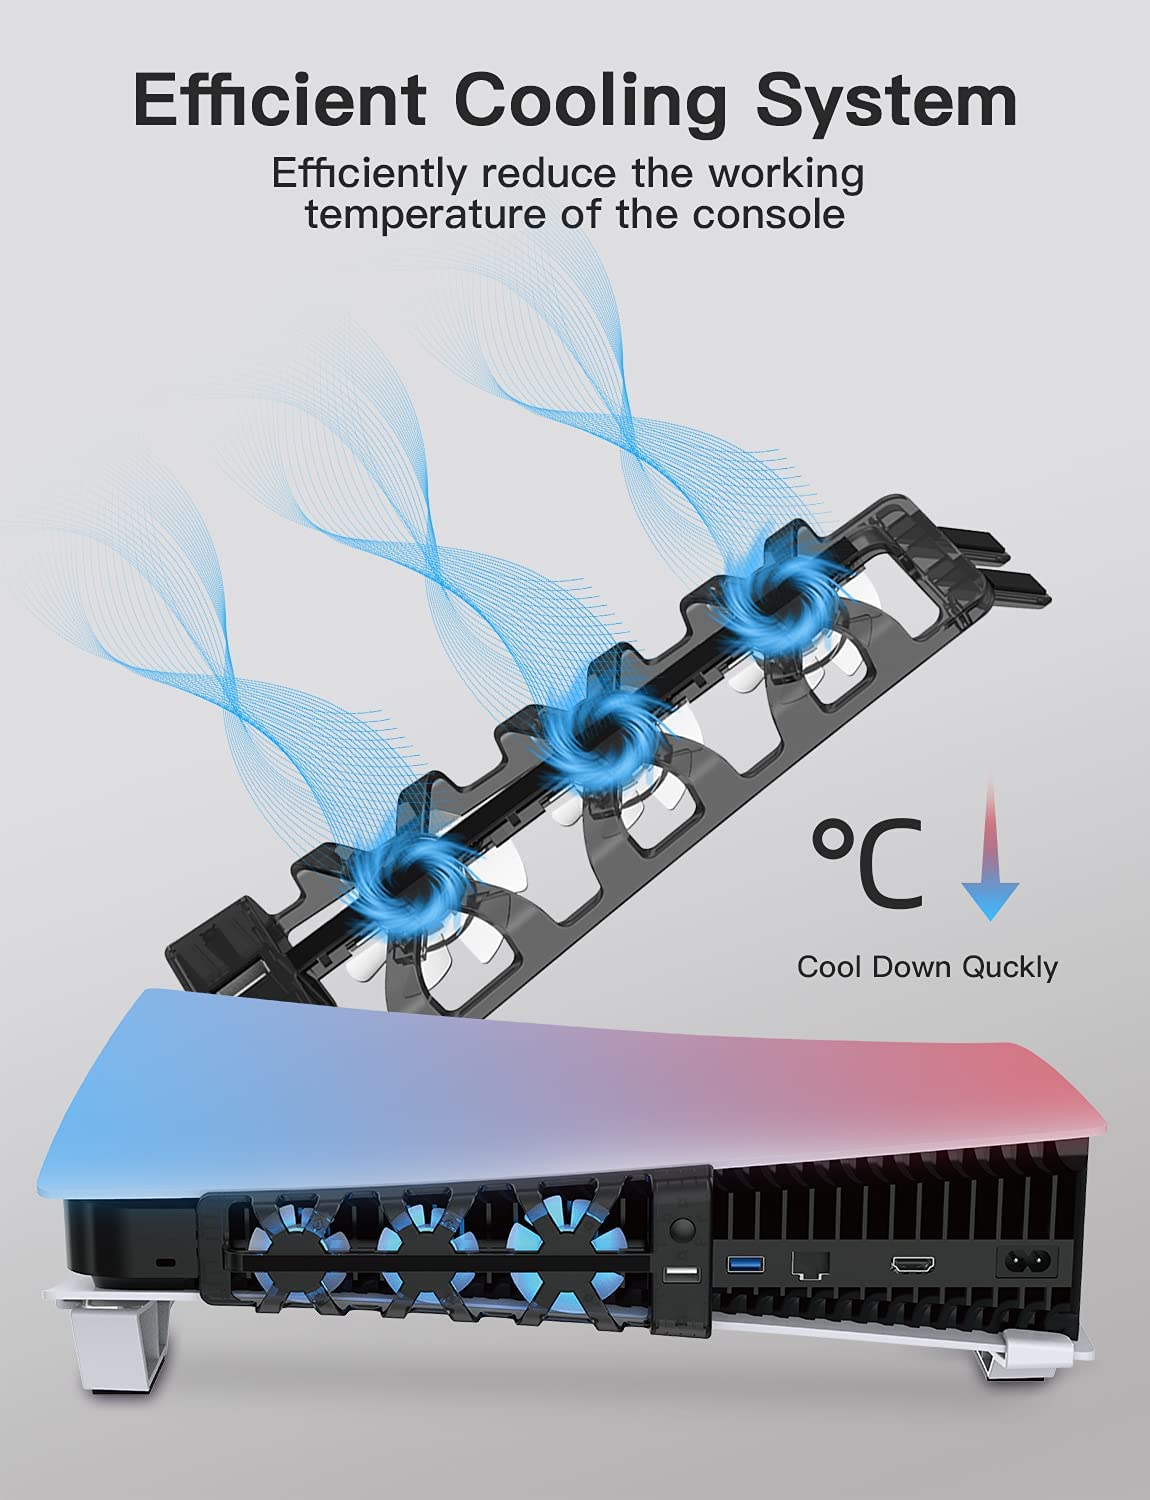 Provide an efficient cooling system to help reduce the working
the temperature of the console.